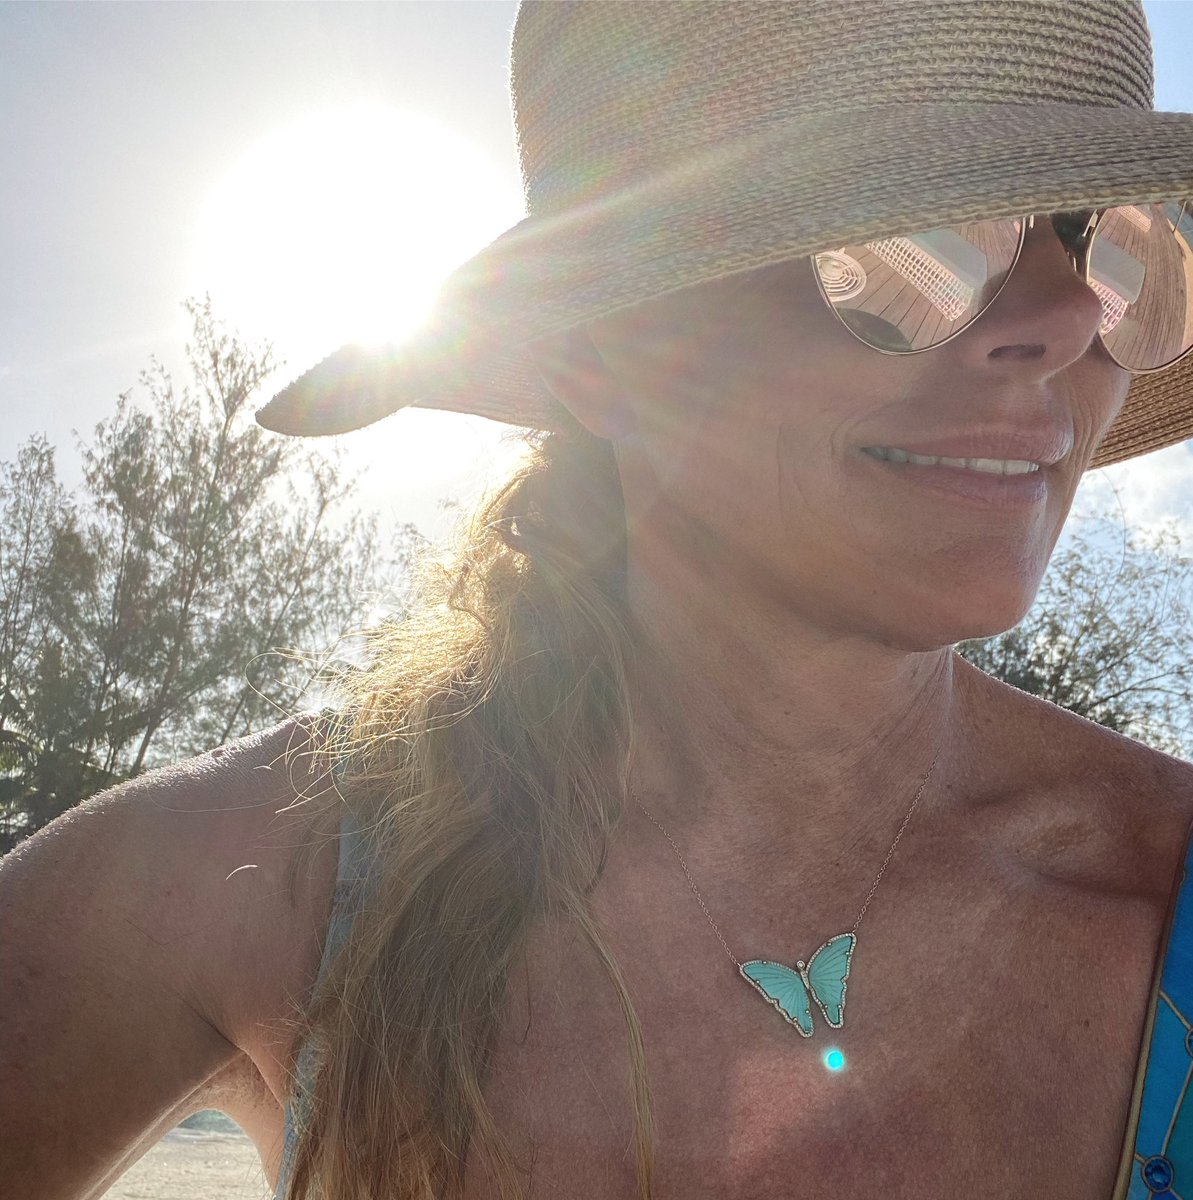 Last weekend of summer here we come “When summer gathers up her robes of glory, And, like a dream, glides away. “
Sarah Helen Whitman #endofsummer #summer #summerdays #butterfly #butterflynecklace #summervibes   ☀️the tan will fade but the memories will last a lifetime ☀️